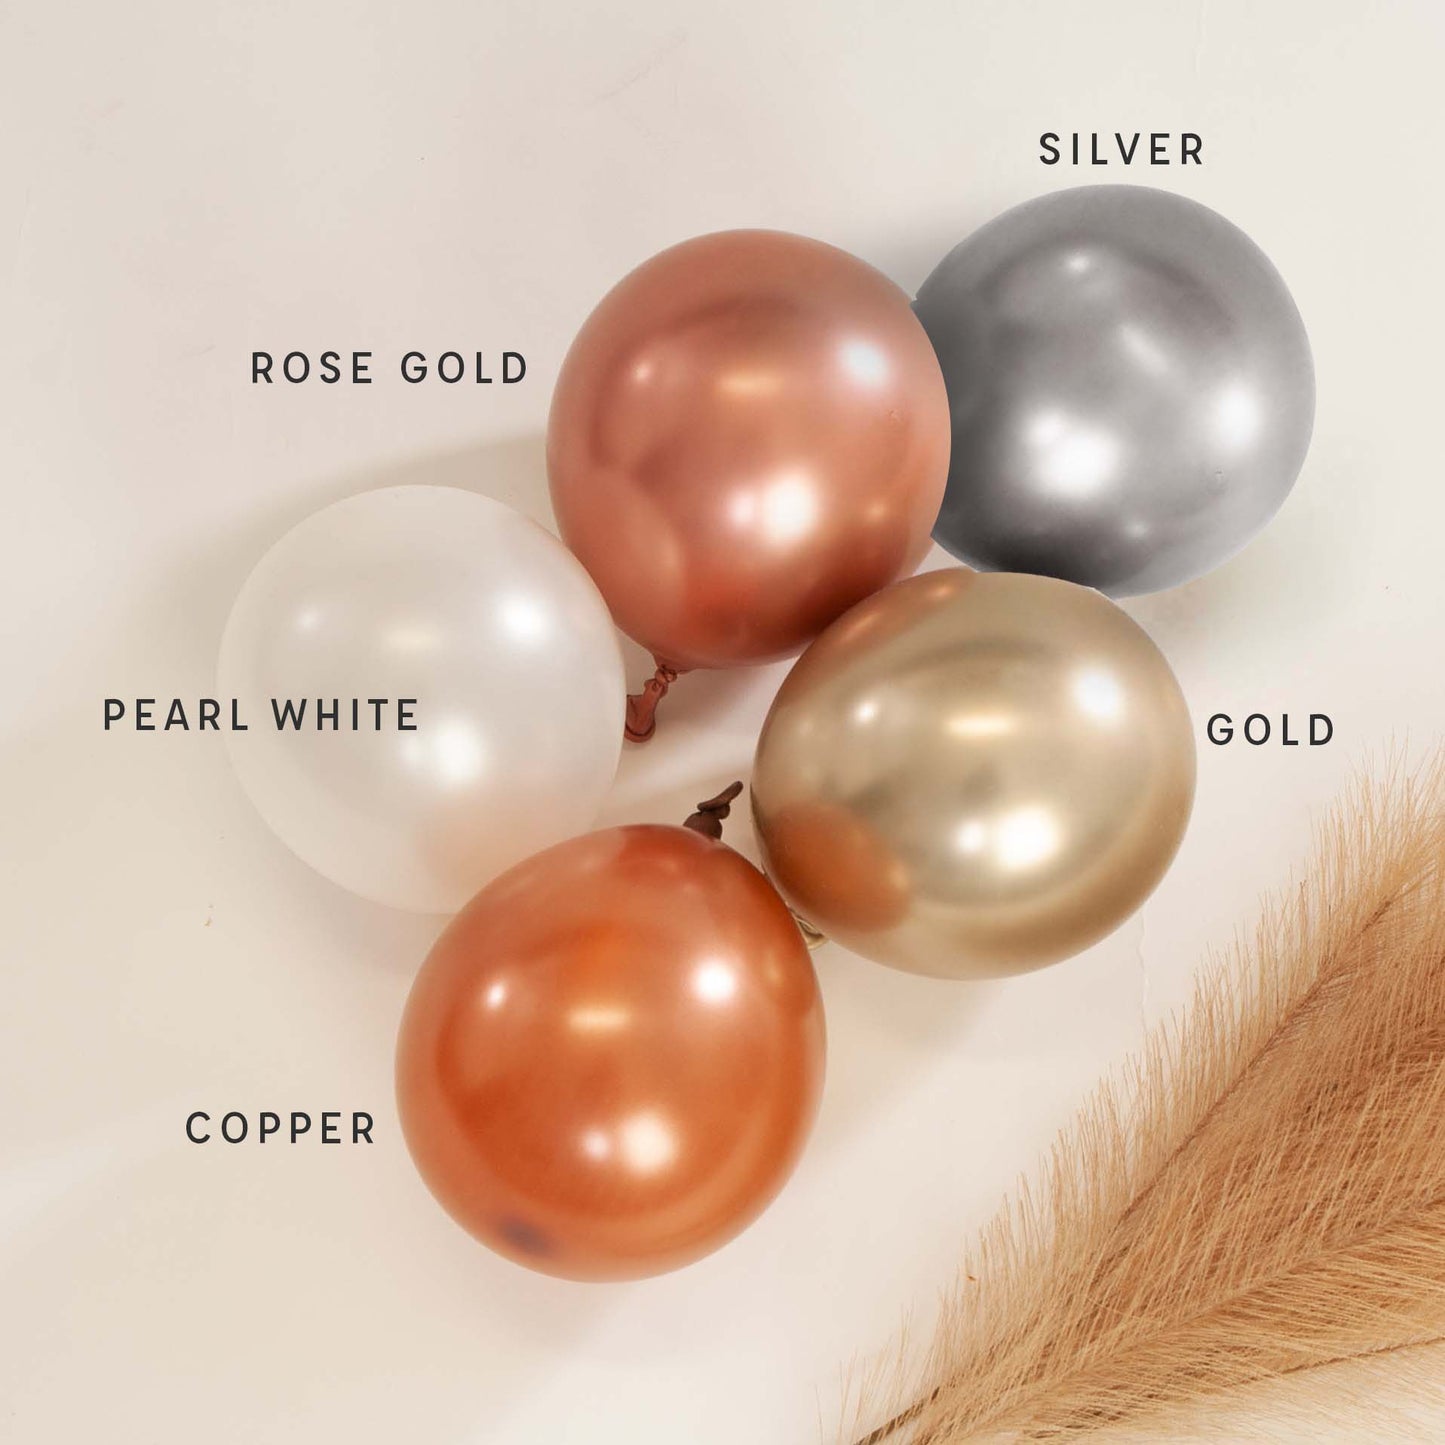 Premium Pearl White Latex Balloon Packs (5", 11”, 16”, 24”, and 36”) - Ellie's Party Supply